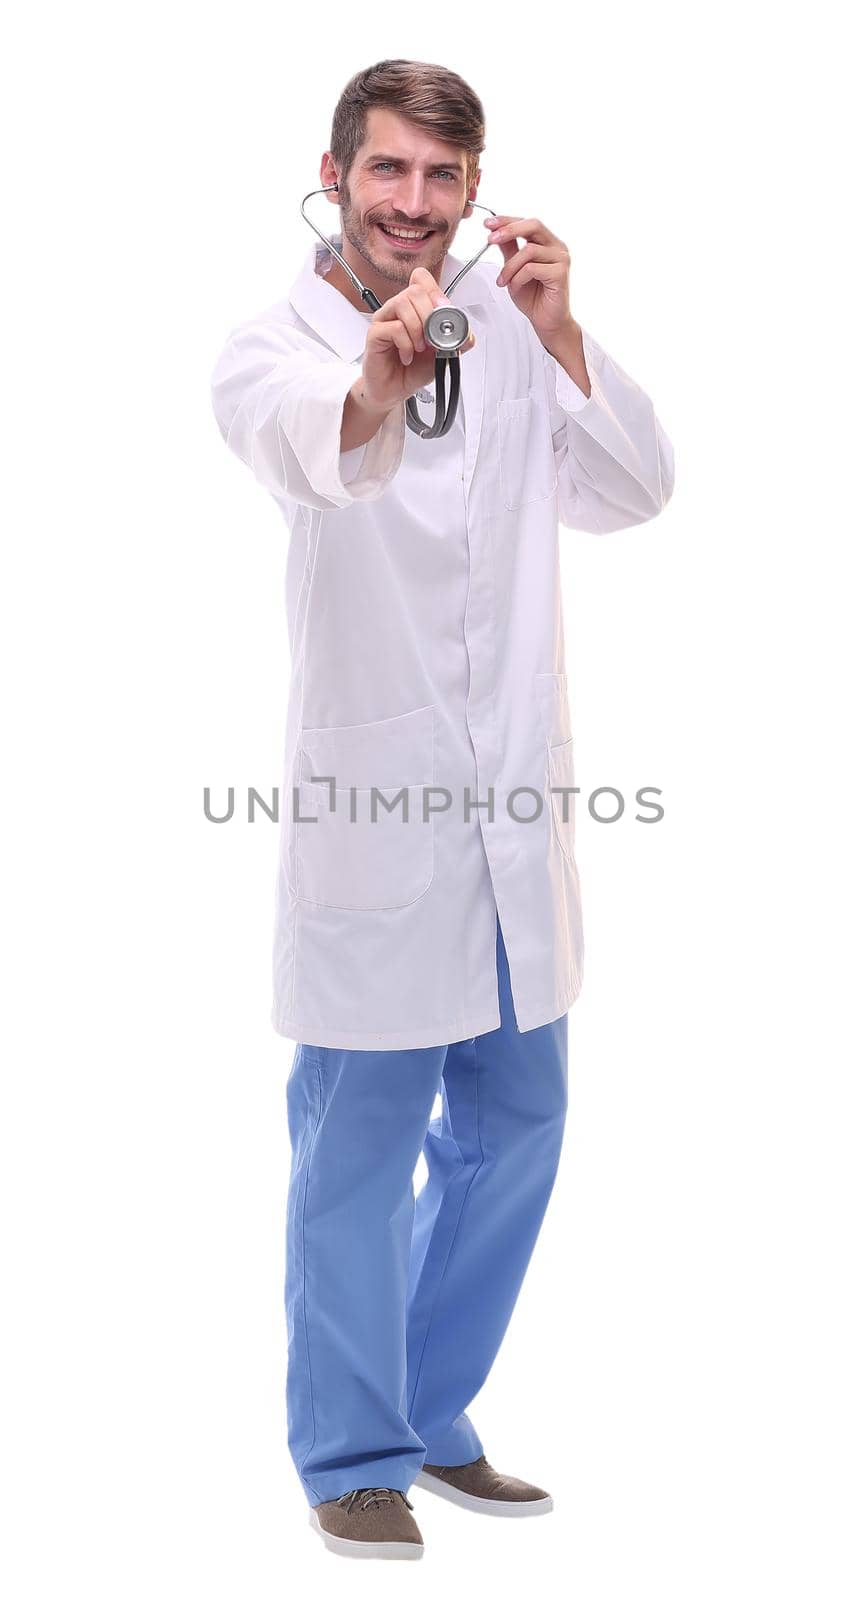 in full growth. attentive doctor therapist with stethoscope .isolated on white background